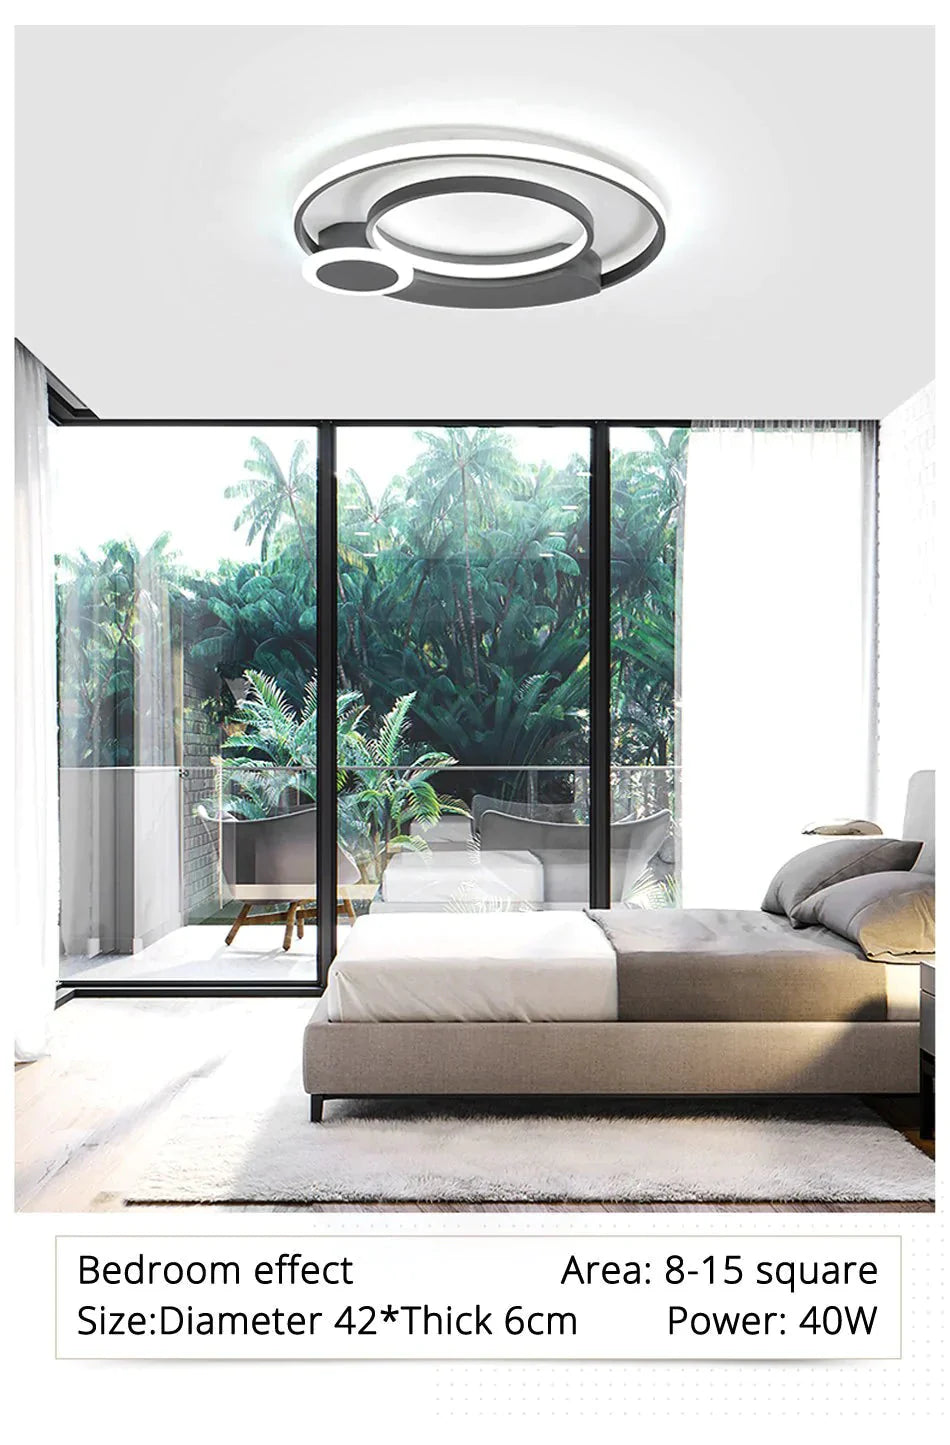 New Modern Led Ceiling Lights For Living Room Bedroom White With Black Surface Mounted Lighting